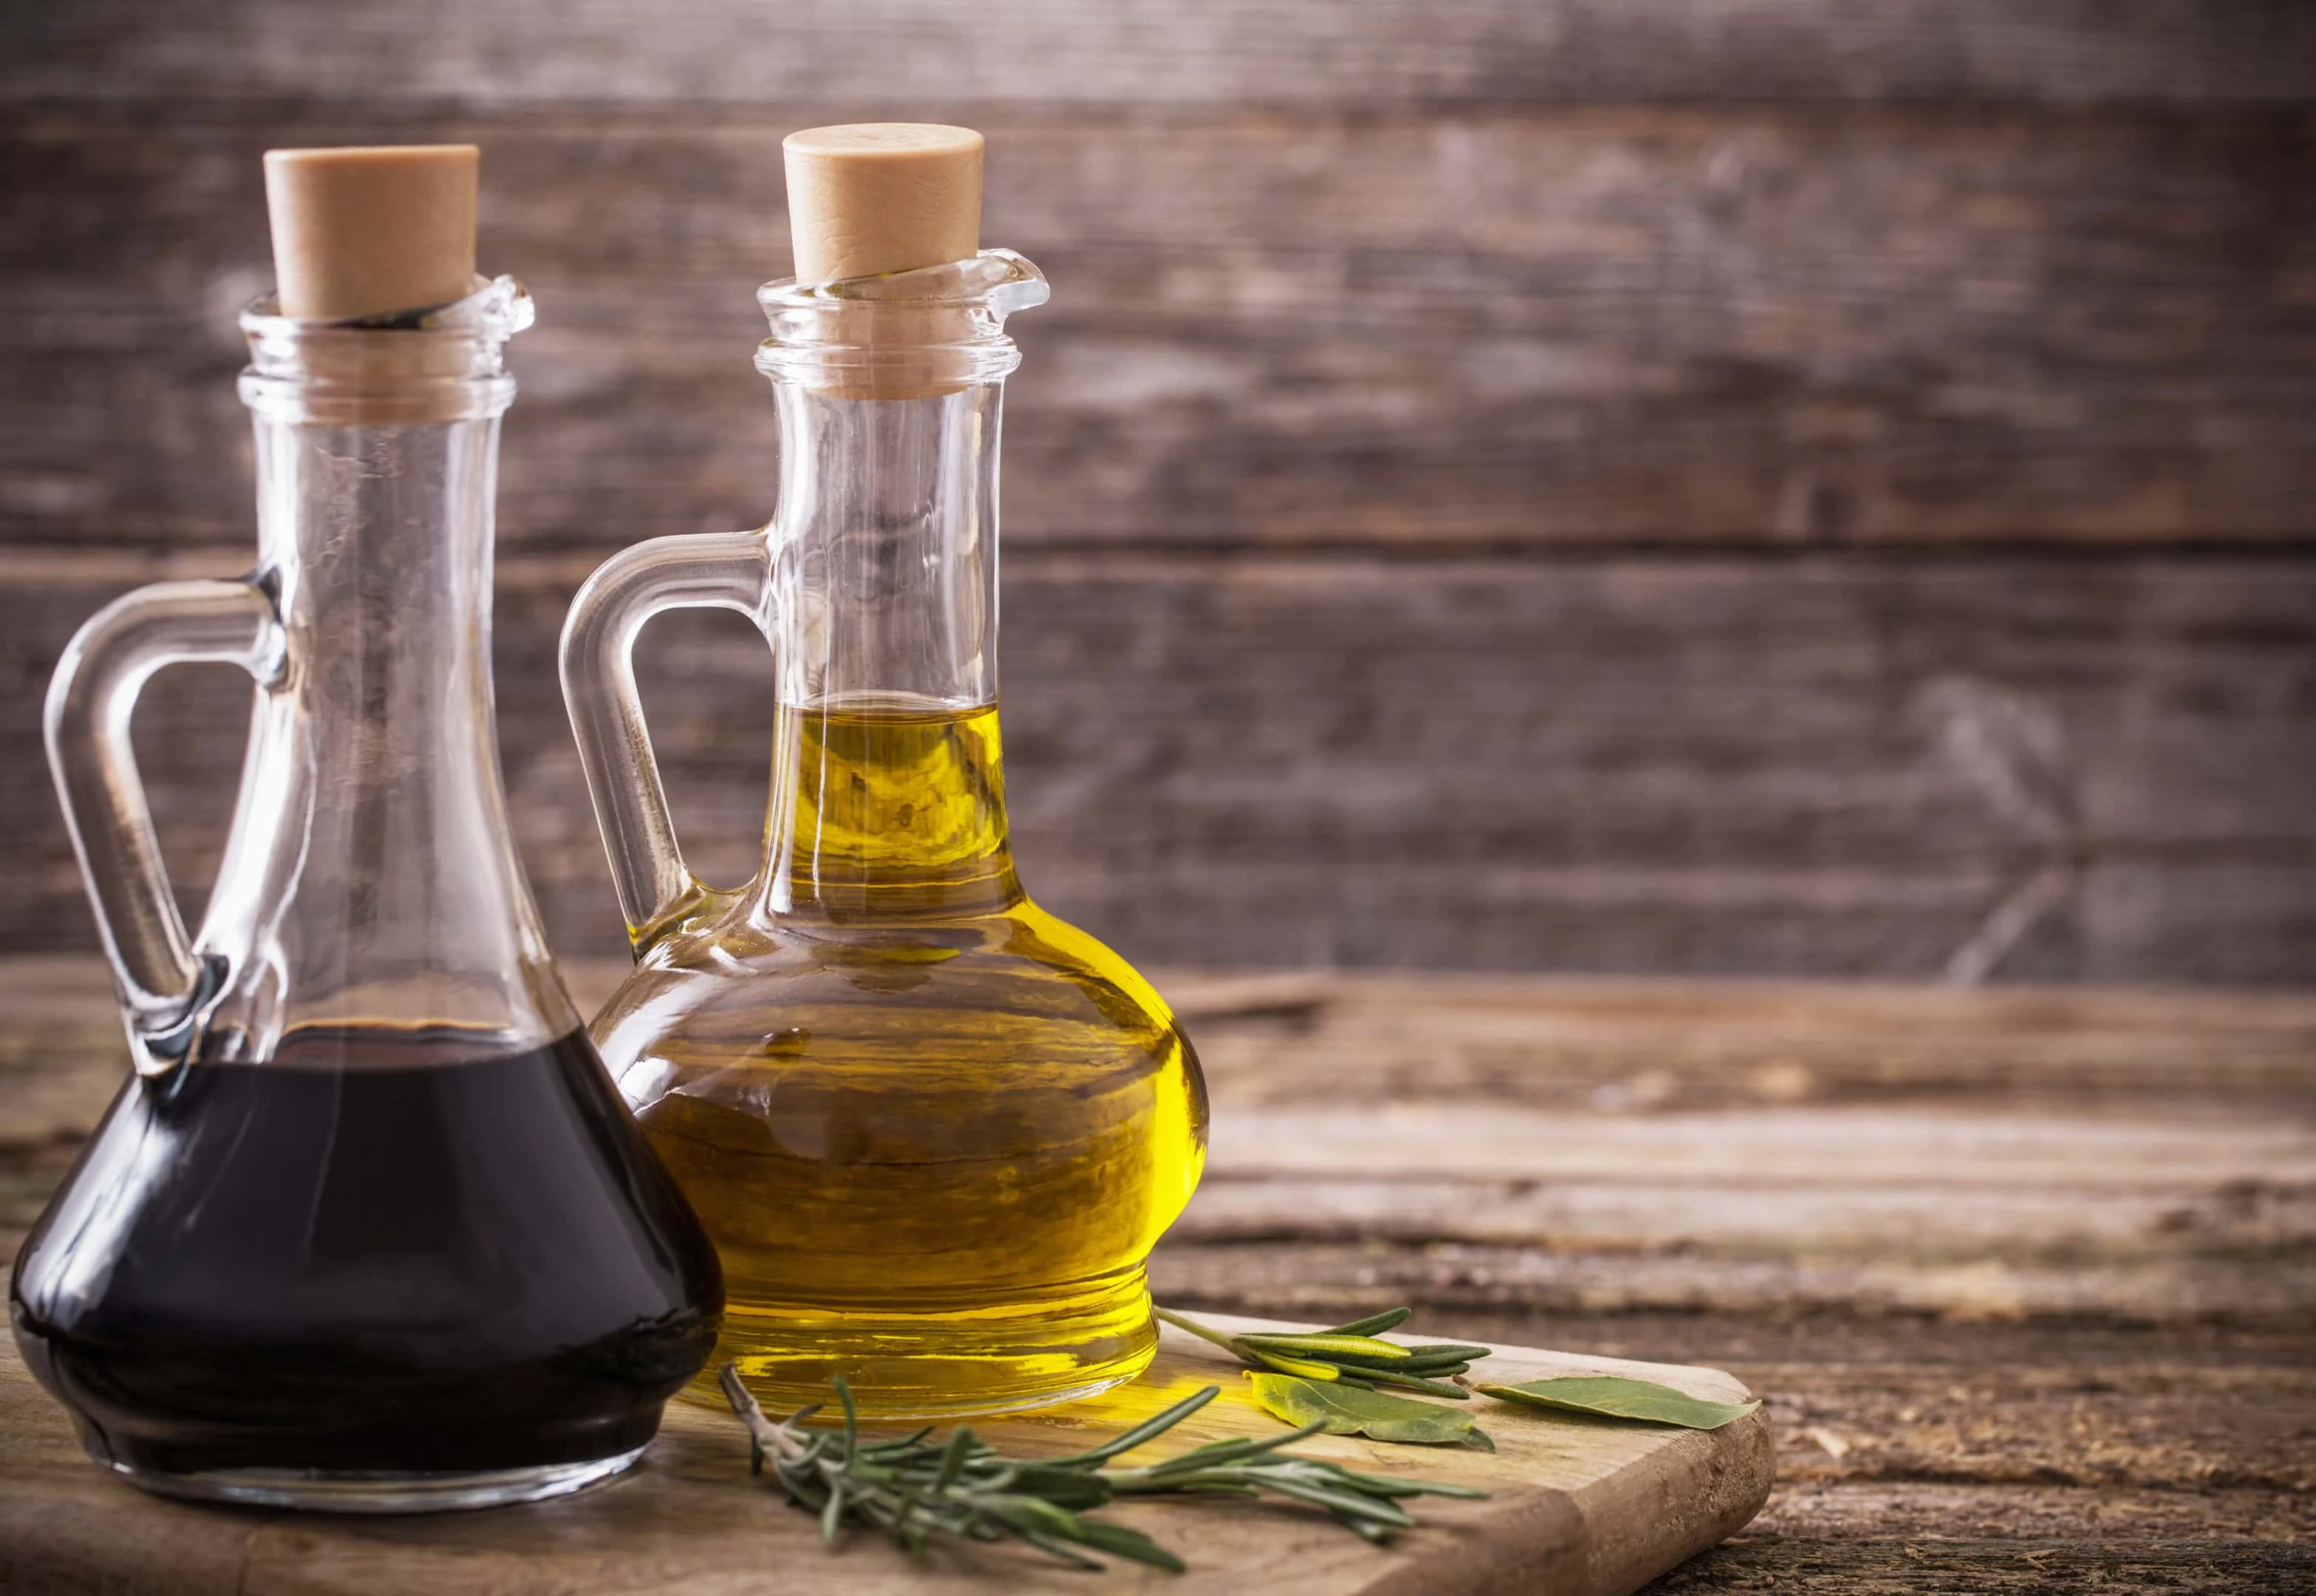 Balsamic vinegar and olive oil on wooden table